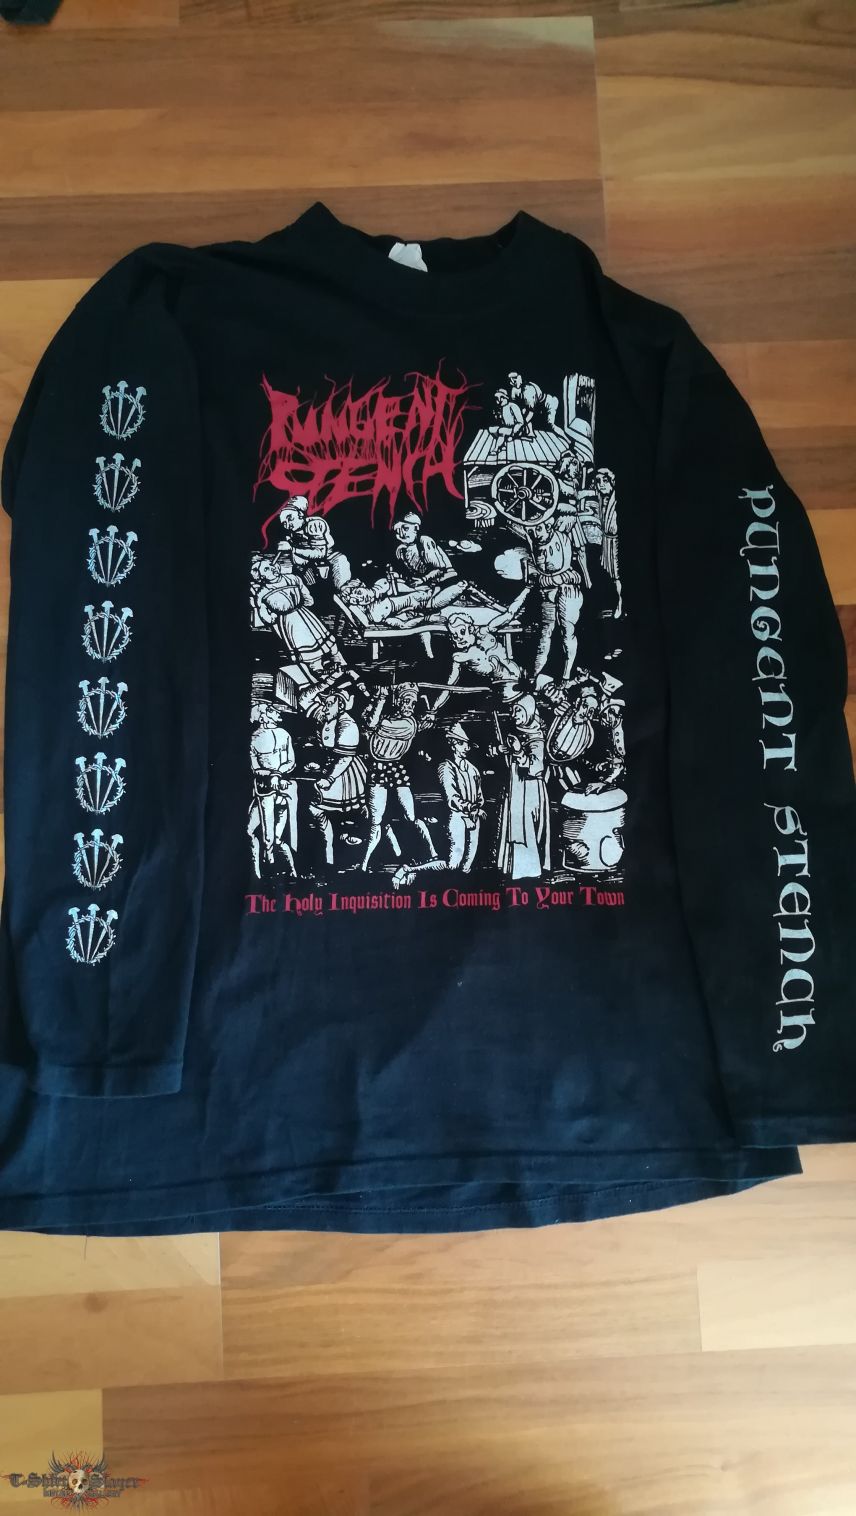 Pungent Stench Holy Inquisition Tour 2003 Longsleeve